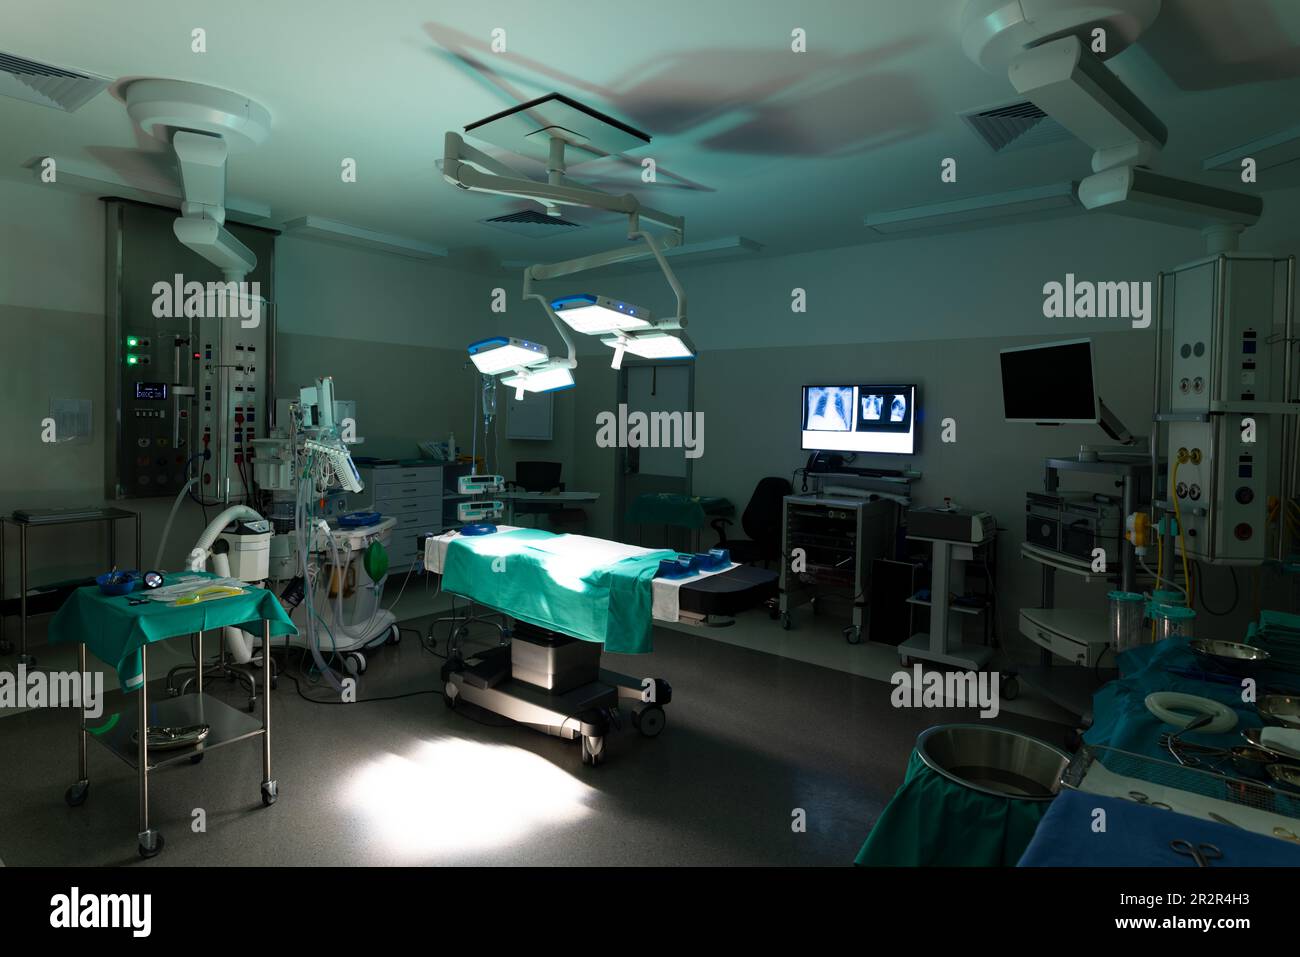 General view of operating theatre at hospital, with operating table and equipment in low light Stock Photo